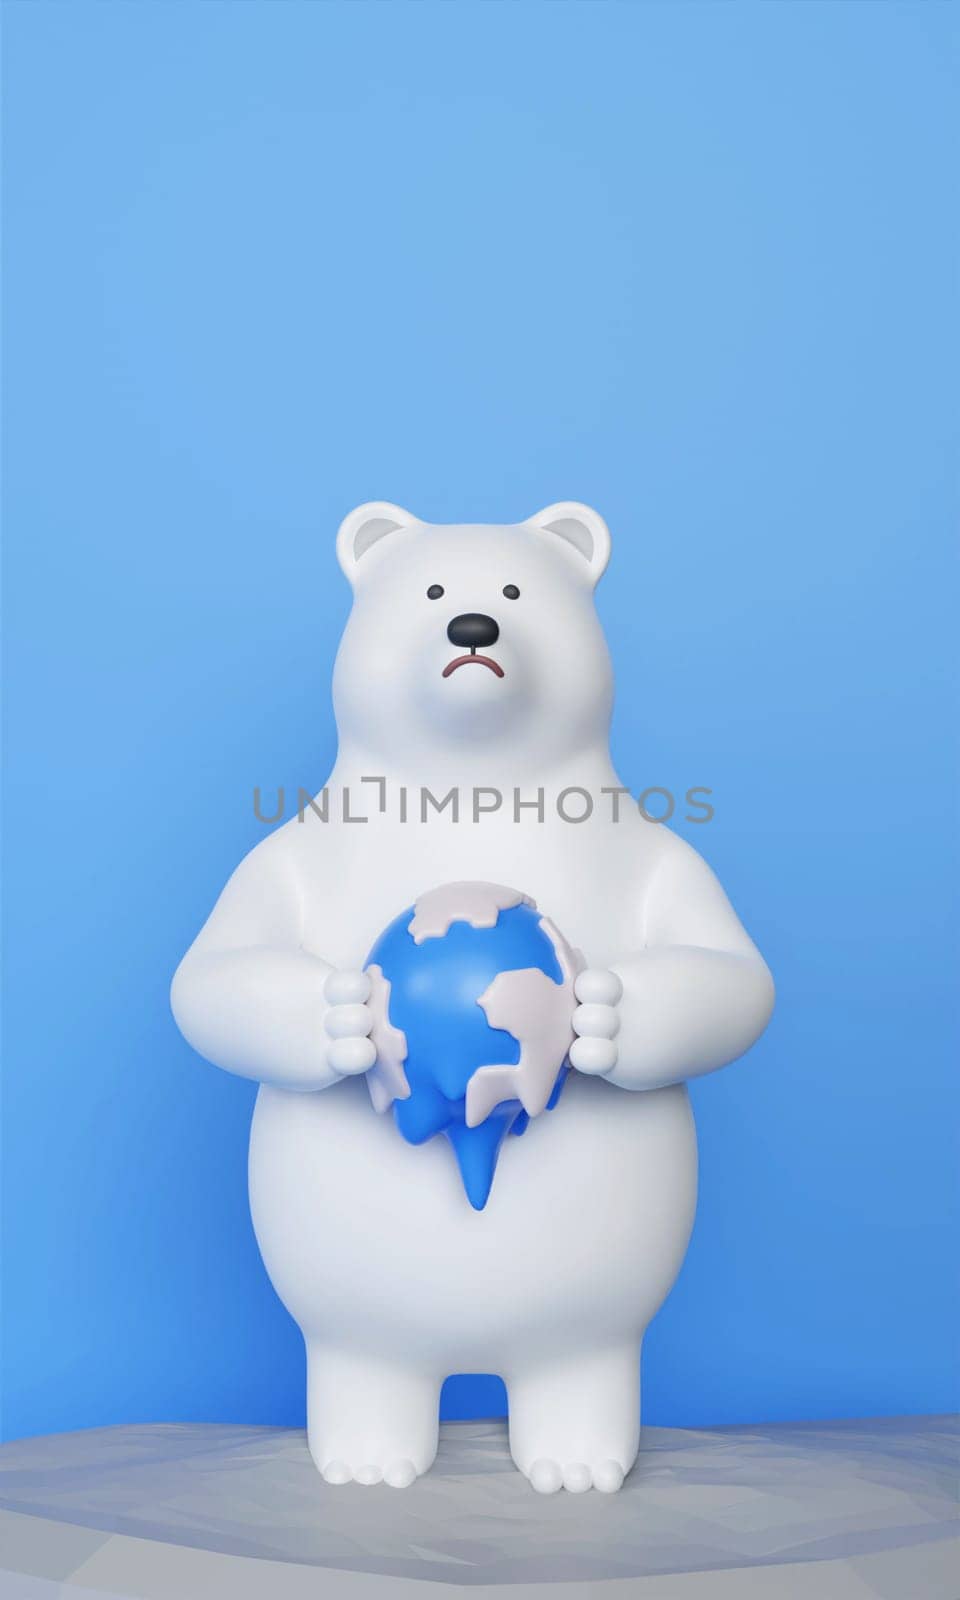 3d Baer hold melt planet. Global warming problem concept. melting polar ice problem. save the planet. 3d rendering illustration. by meepiangraphic